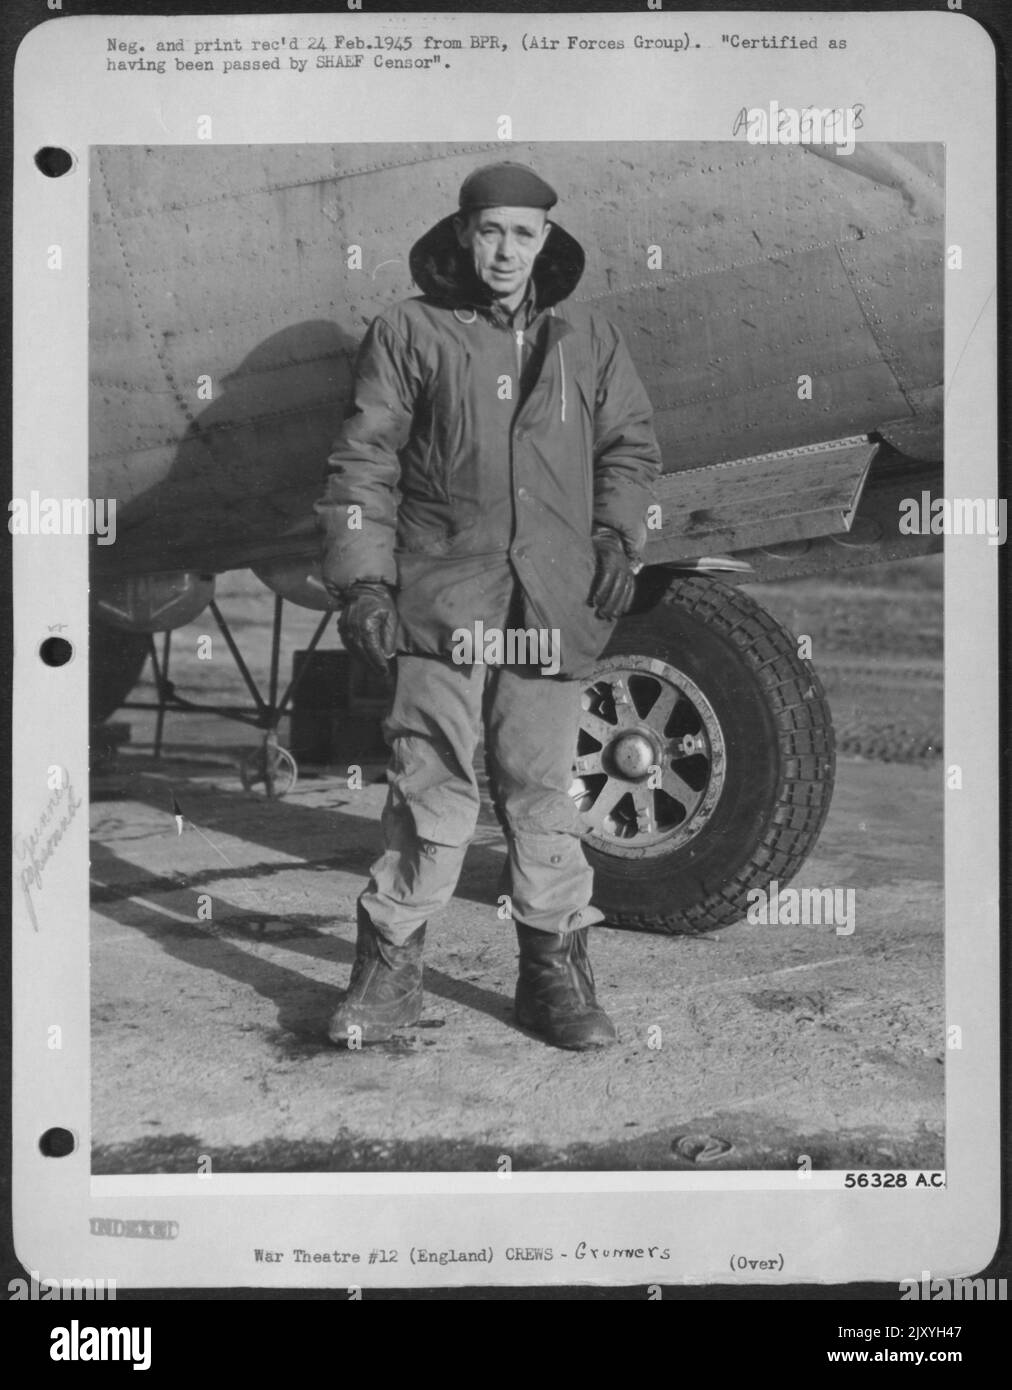 At 46, Sgt. Wills N. Gardner, of Eire, Pa., is the oldest air gunner on combat duty with the 458th Bomb Group of the U.S. 8th AF 2nd Air Div. Sgt. Gardner served 16 months in France in the last war and saw action with the 56th Artillery during the Stock Photo